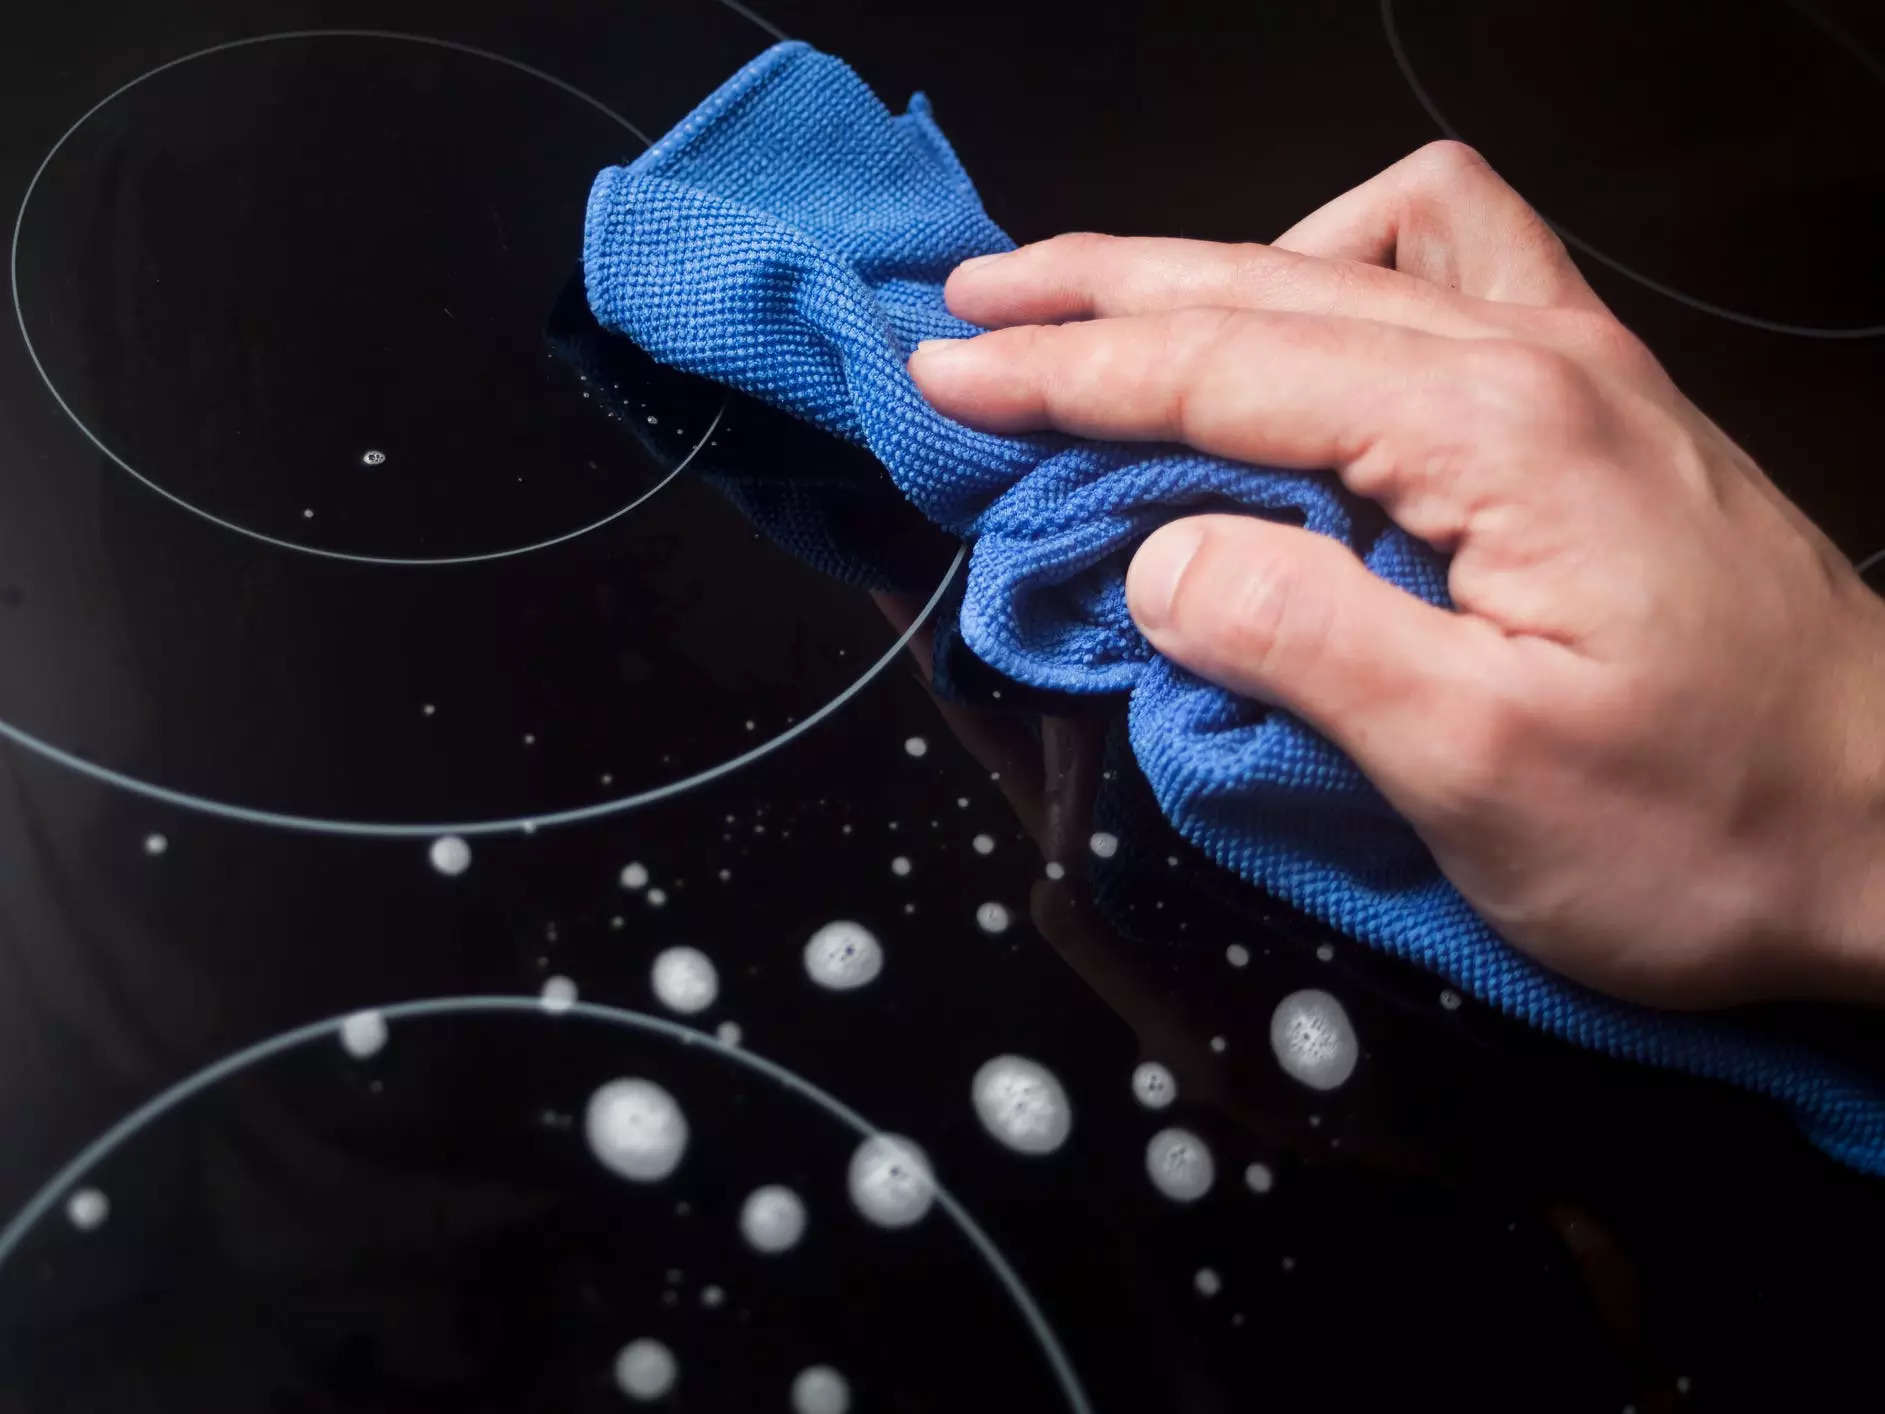 Hand using a microfiber towel on a glass cooktop